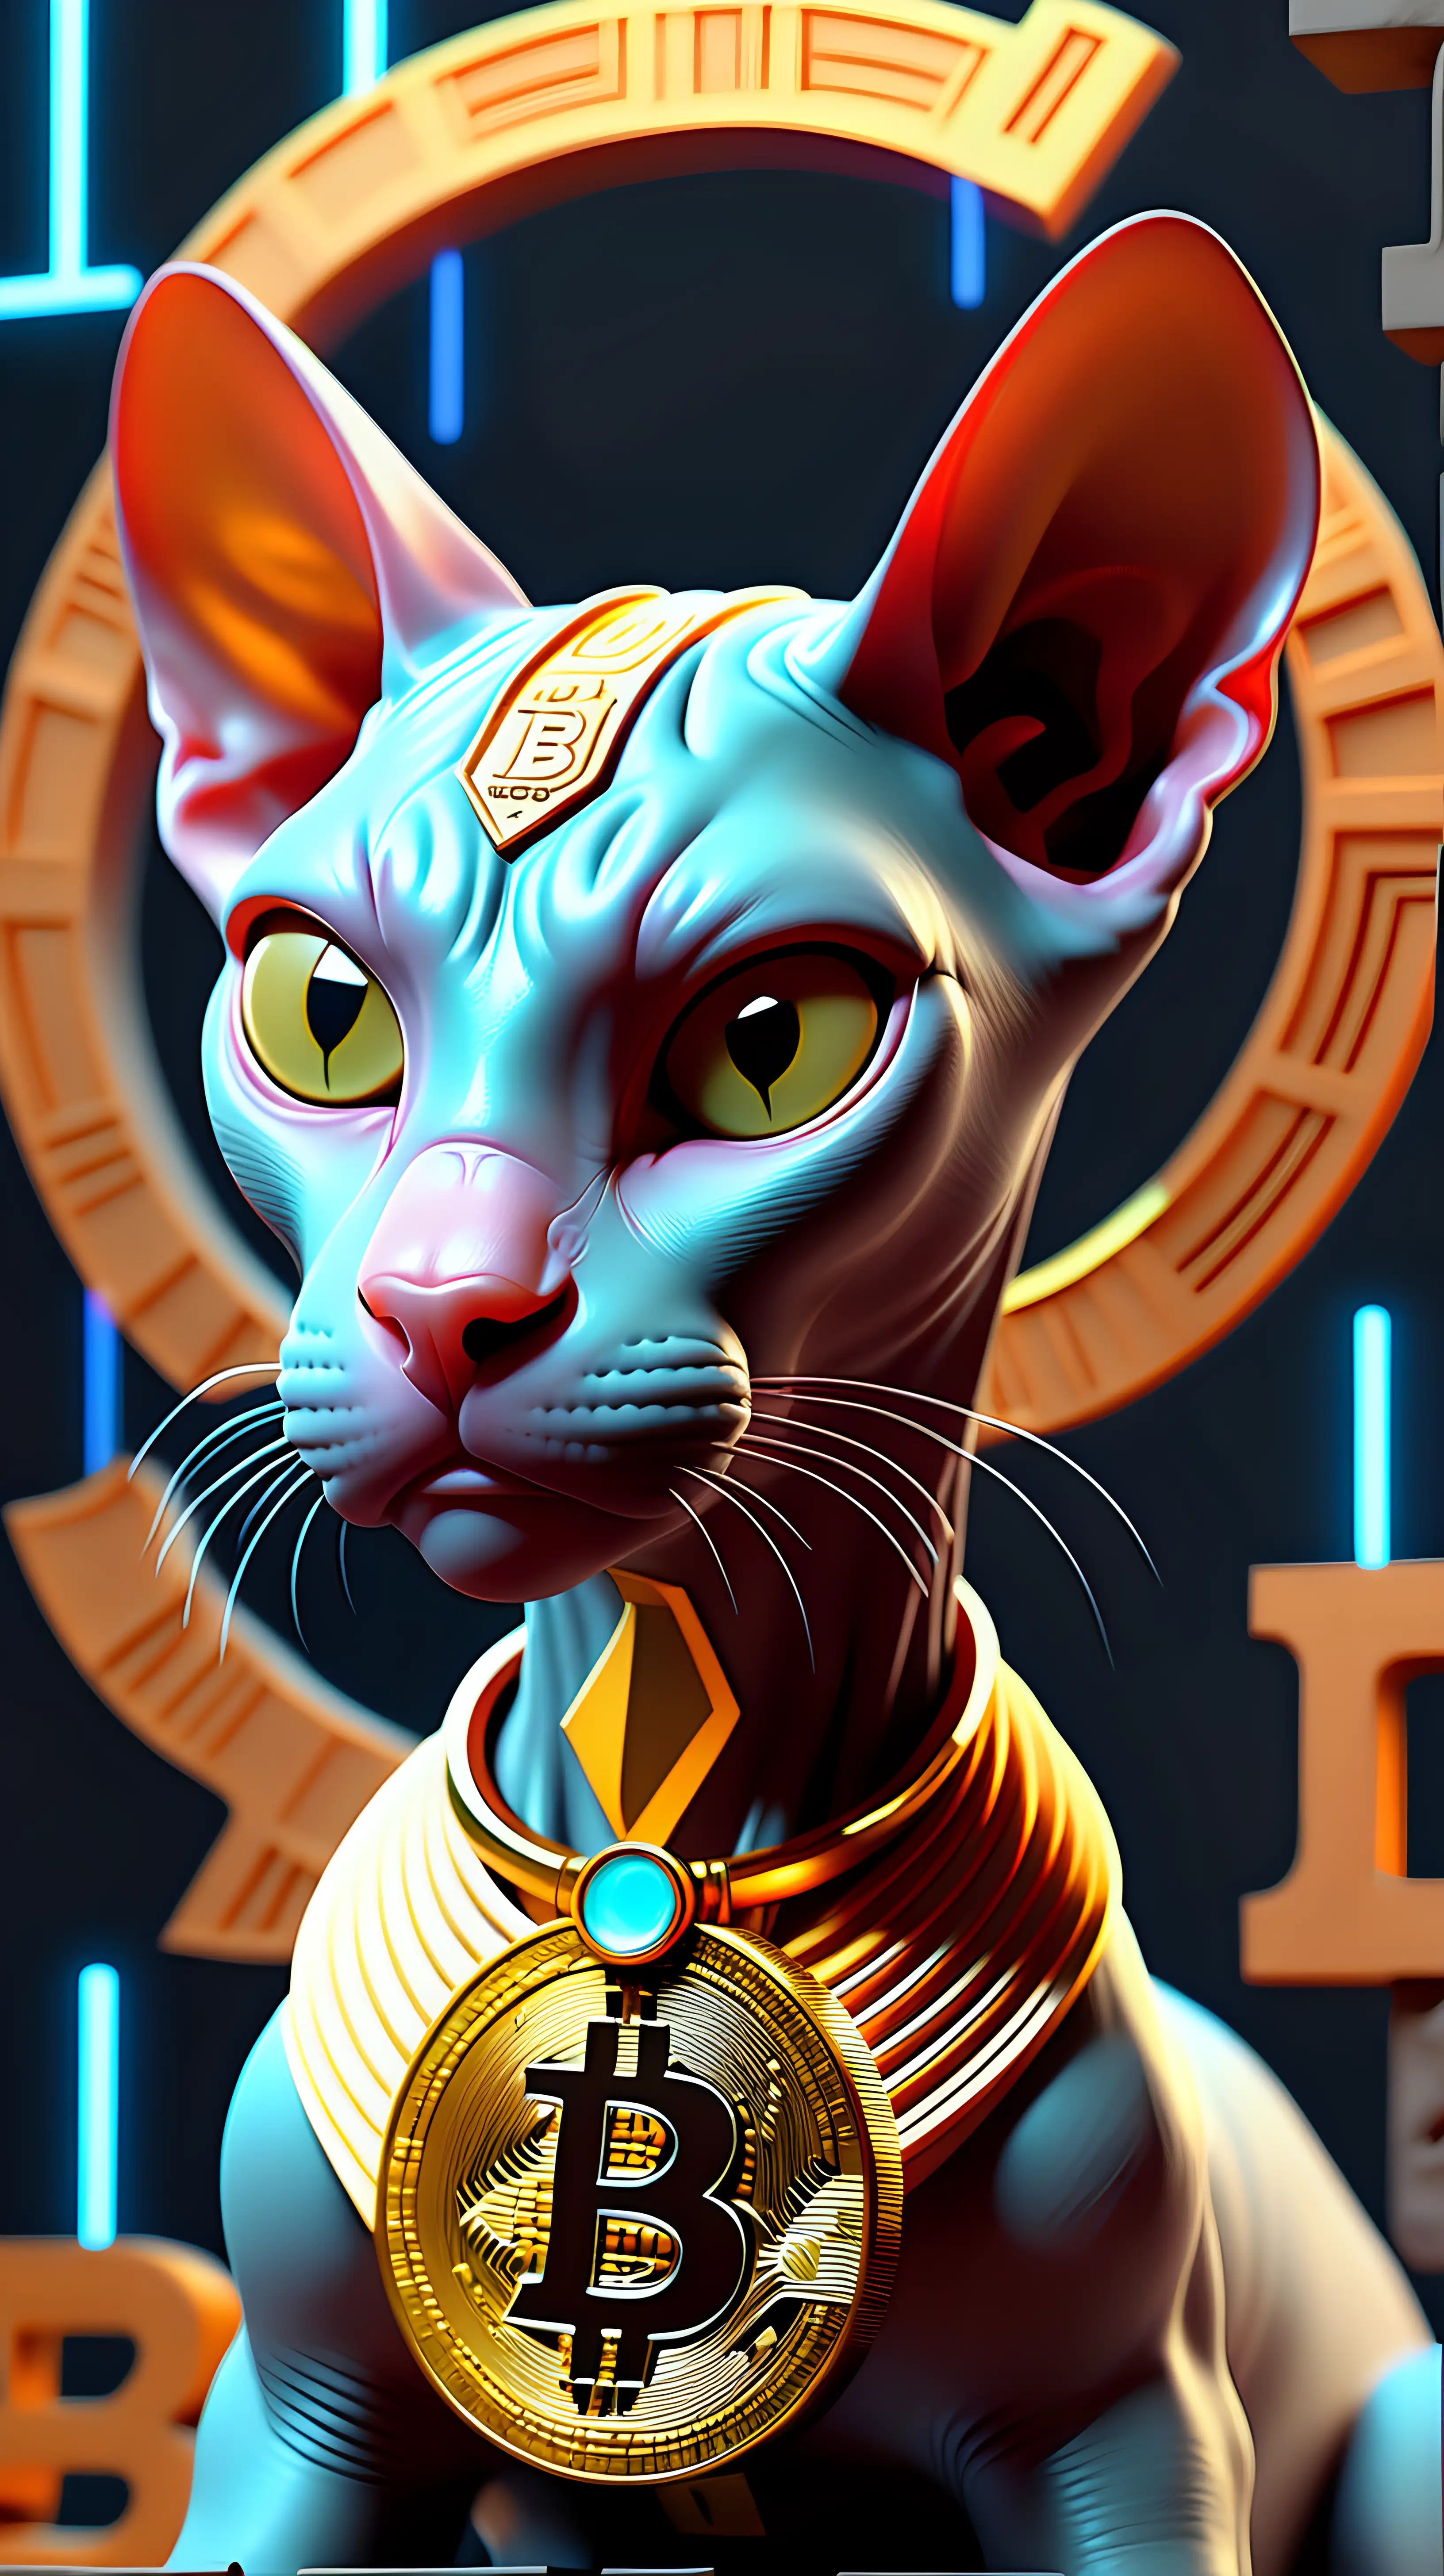 3d animated pimped sphinx cat, perfect lightning and 3D digital art of the Bitcoin symbol in a three-dimensional format, with added elements of abstract shapes in the background. The art piece uses variety of colors or textures to create a unique and visually striking image, and is rendered with a high level of detail to showcase the intricate design of the Bitcoin symbol. 